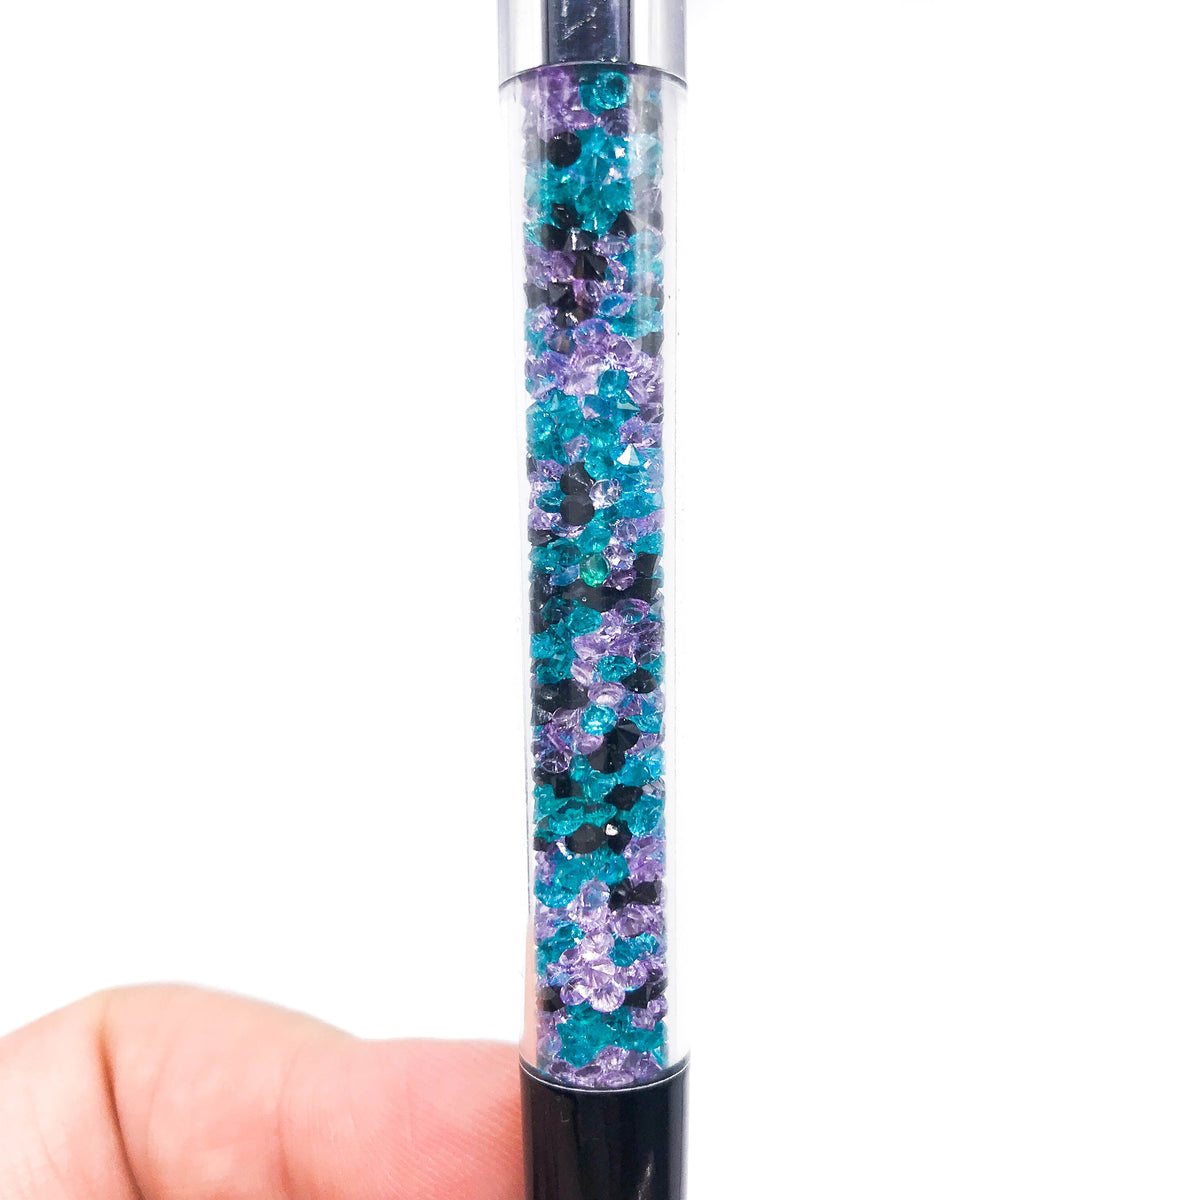 Starfall Imperfect Crystal VBPen | limited